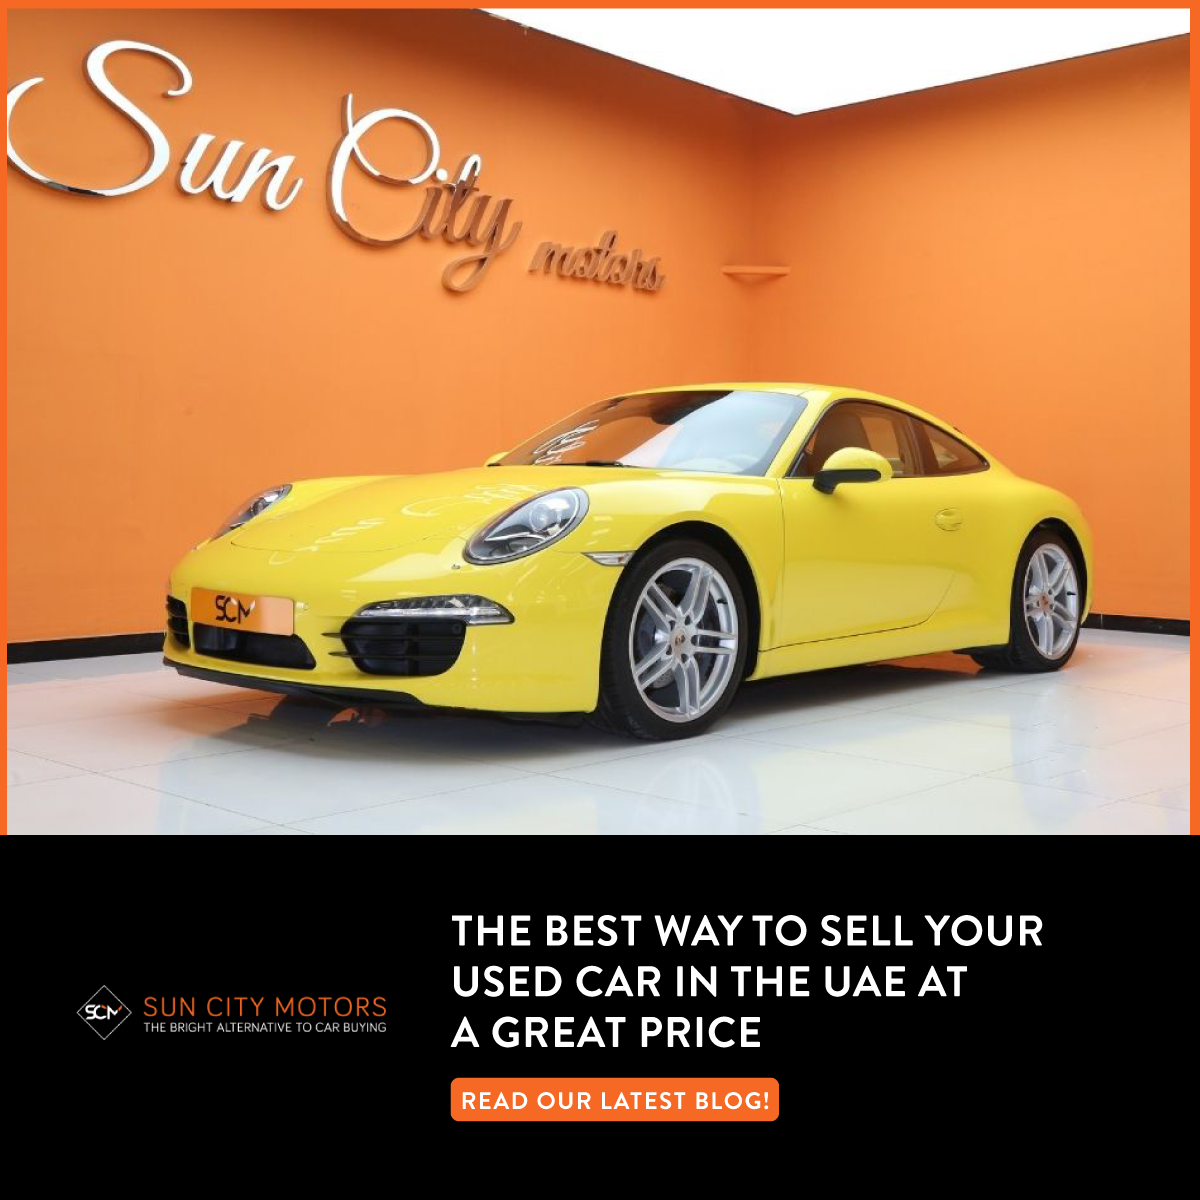 The Best Way to Sell Your Used Car in the UAE at a Great Price